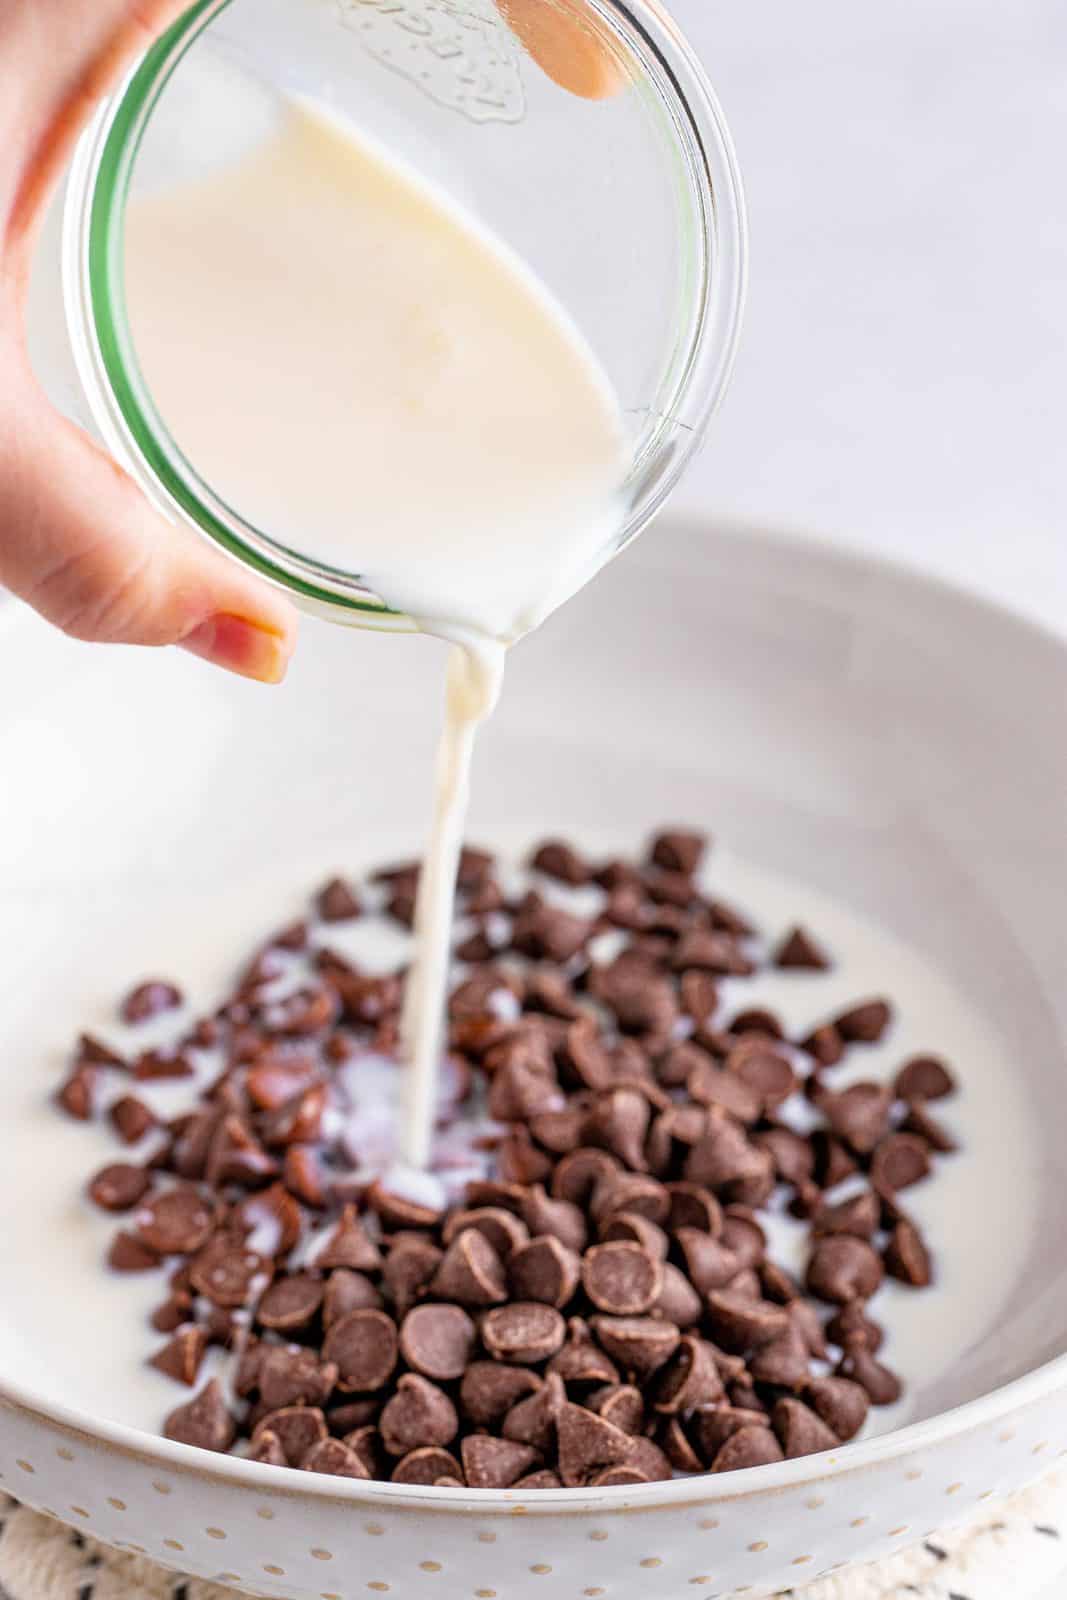 Milk being poured over chocolate chips.